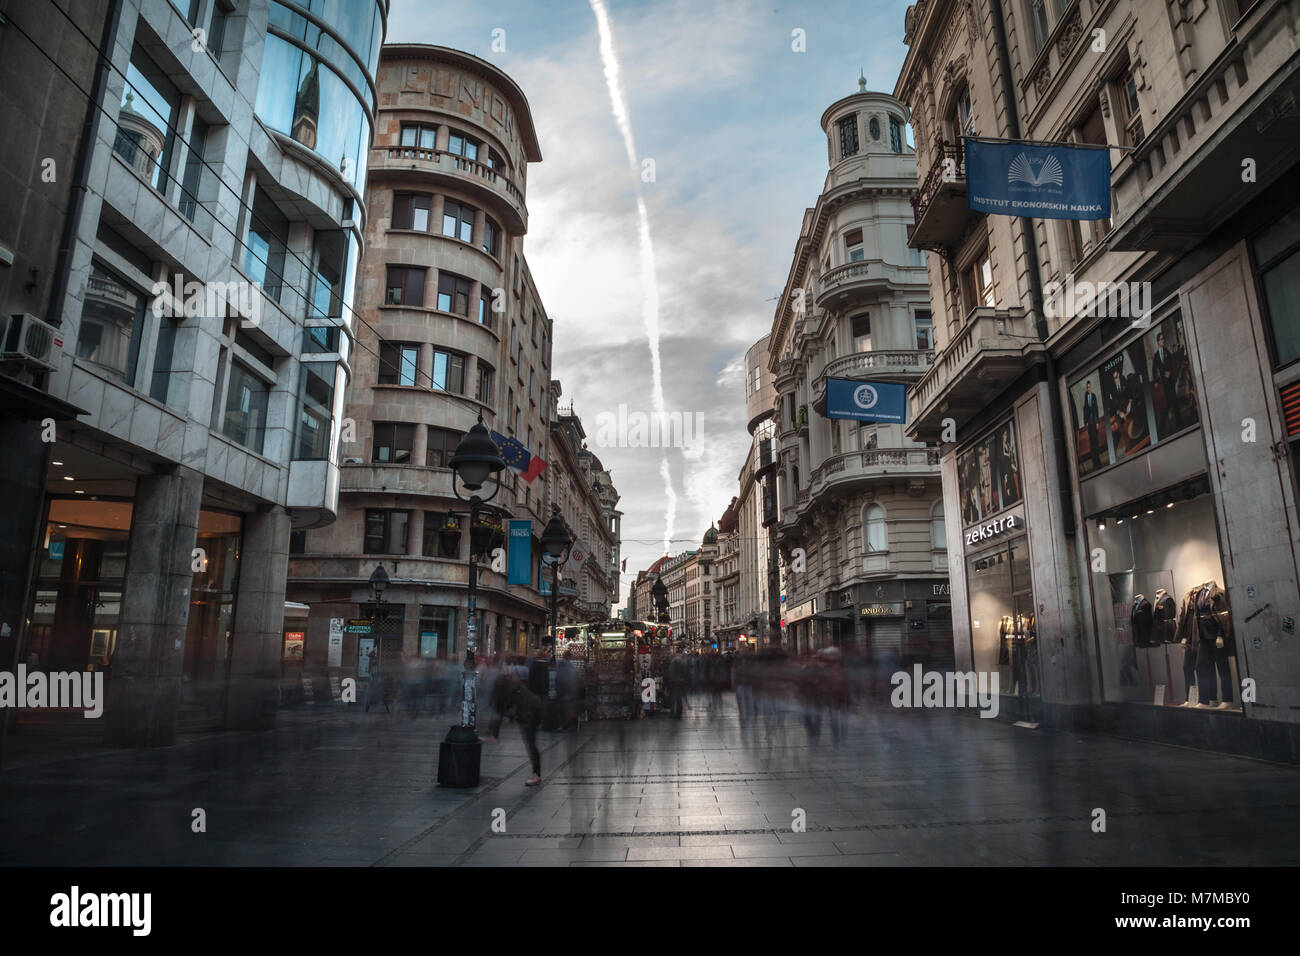 BELGRADE, SERBIA - MARCH 11, 2018: Kneza Mihailova street at dawn, crowded. Also known as Knez Mihaila, this is the main pedestrian street of the city Stock Photo